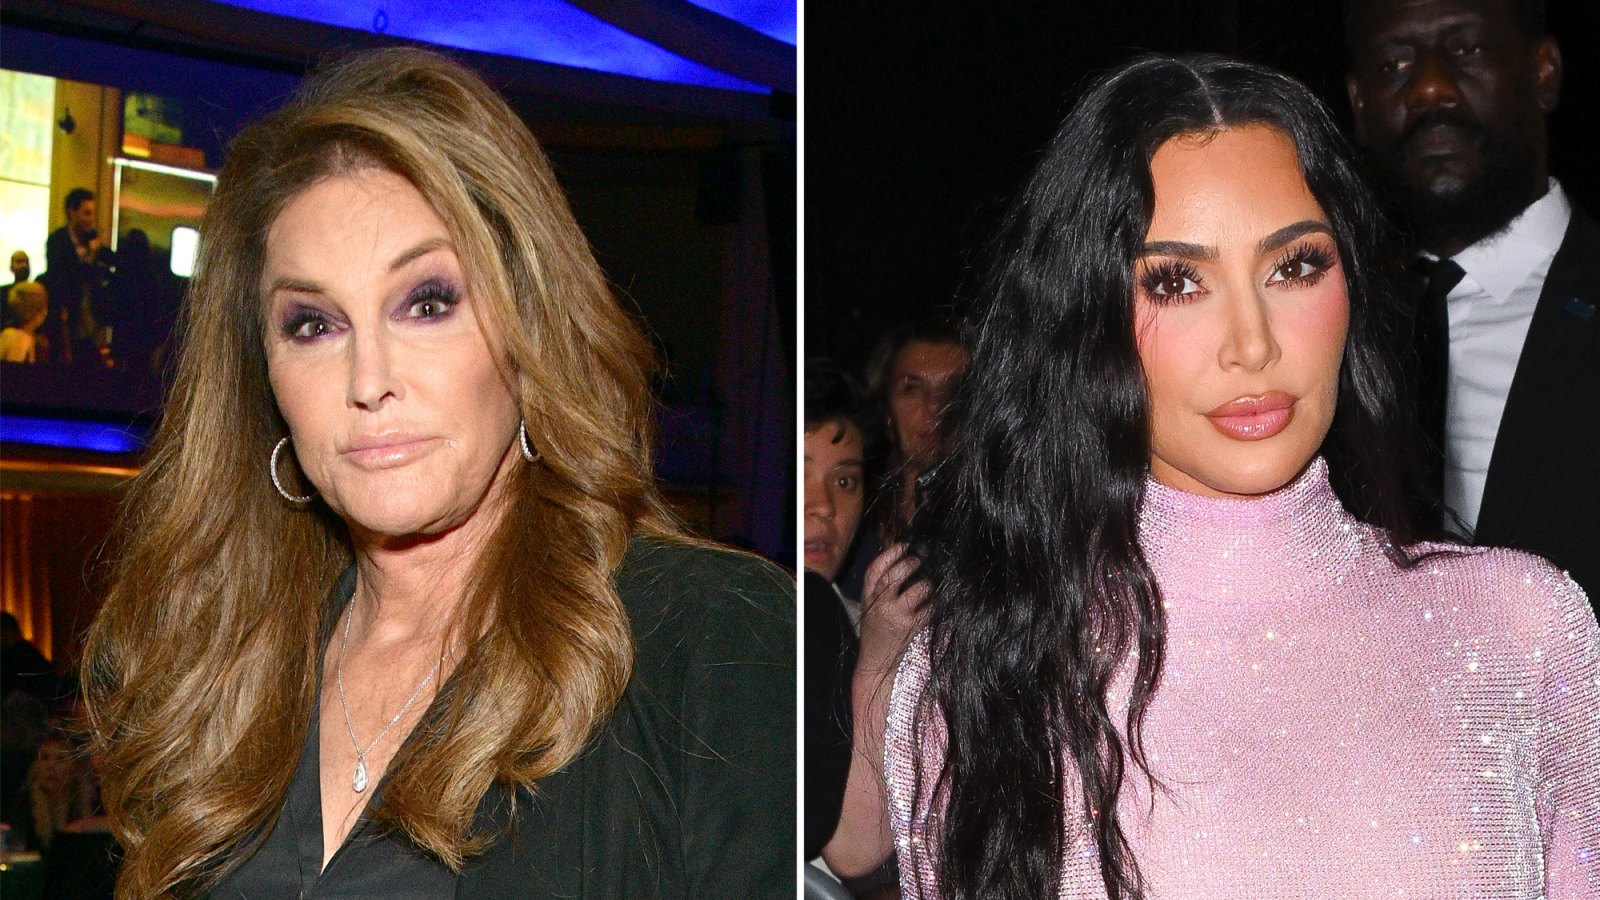 Caitlyn Jenner Reacts to Kim Kardashians Comment About Her in The Kardashians Episode